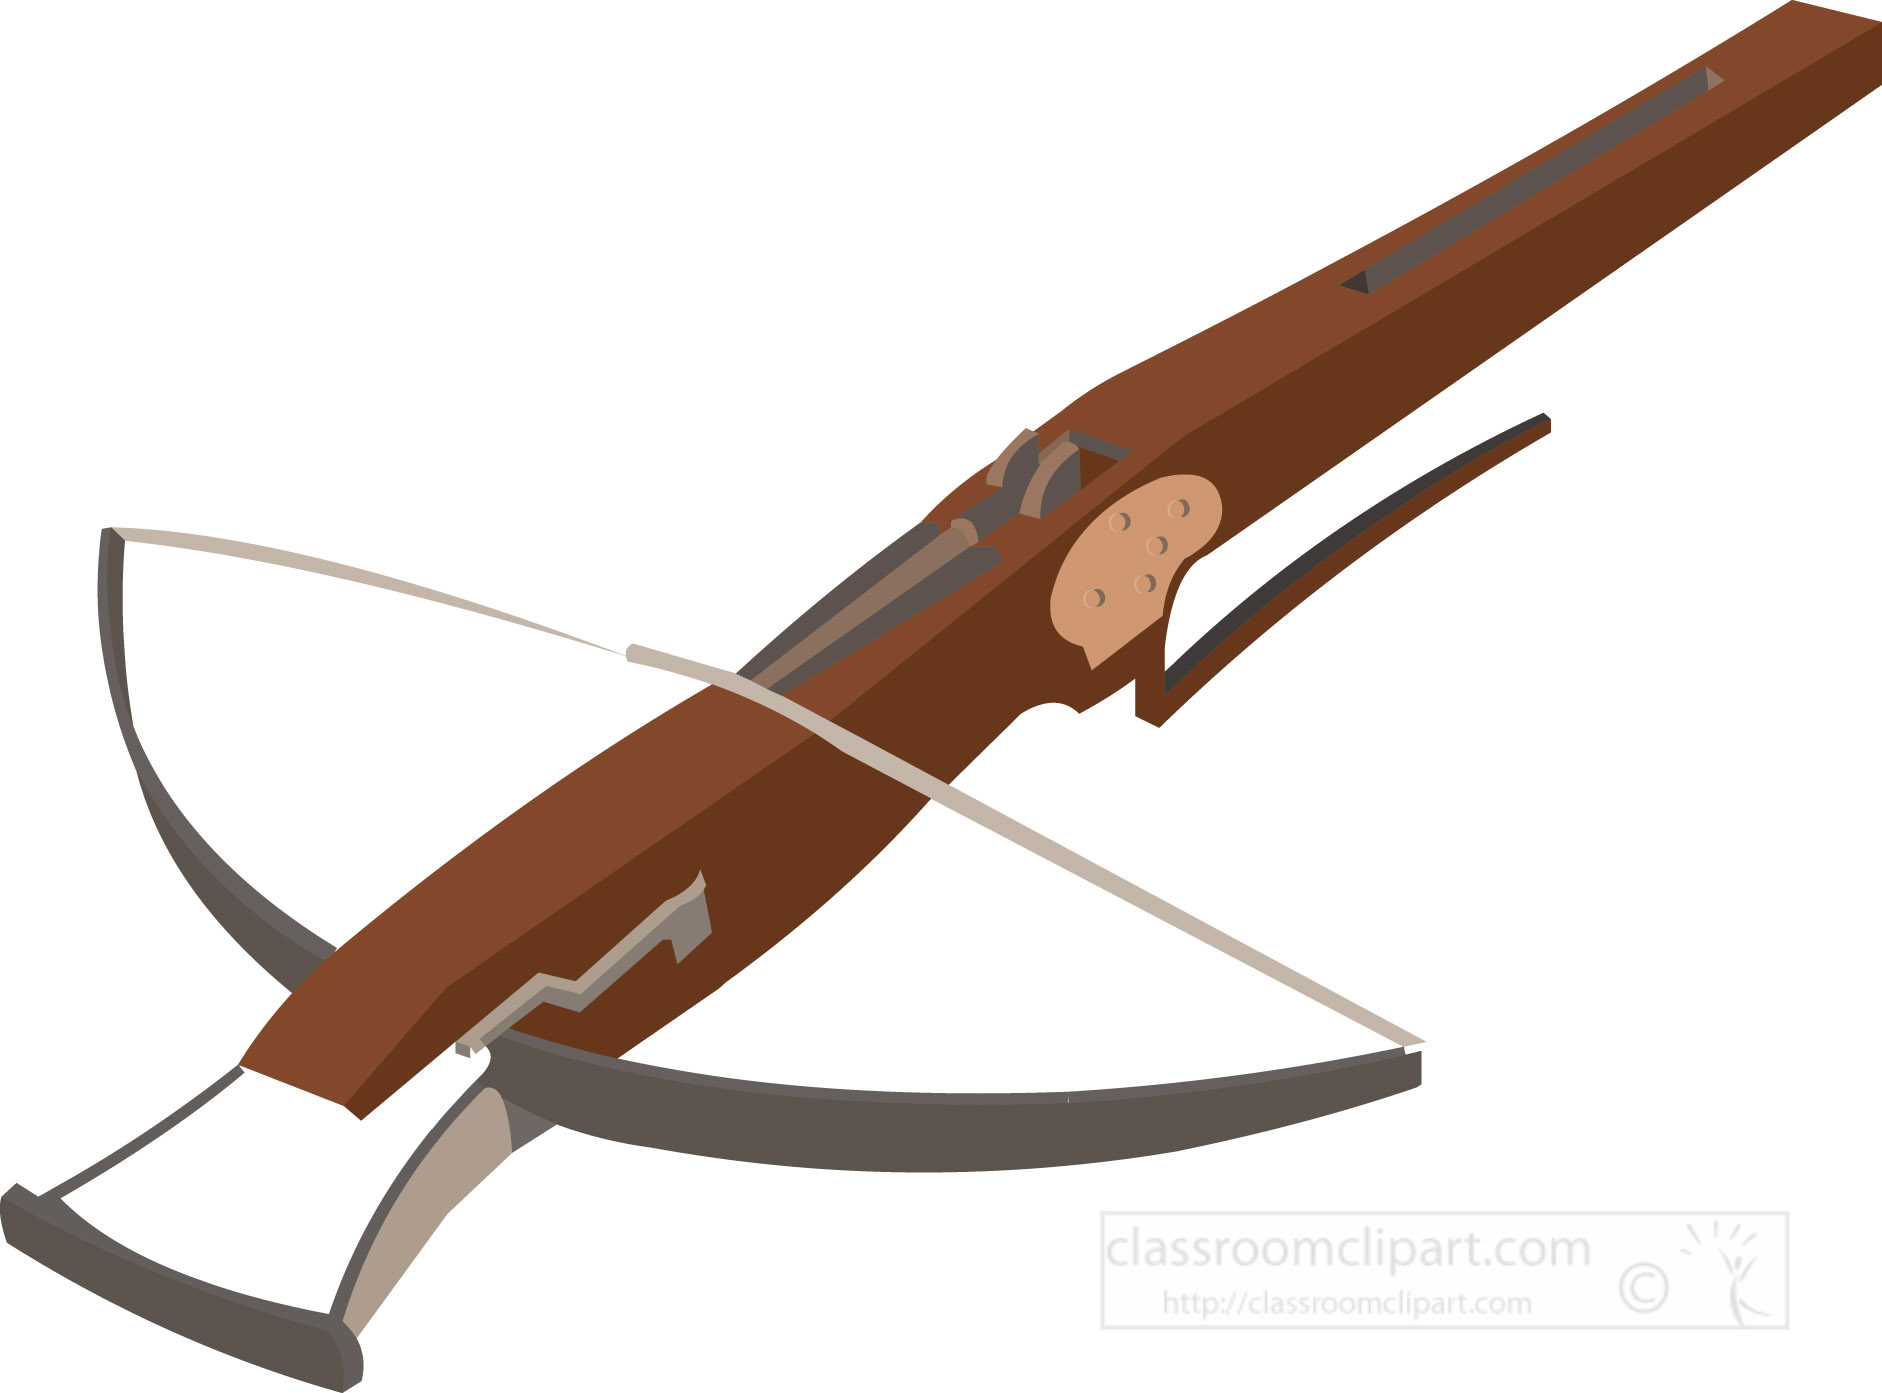 medieval-crossbow-weapon-clipart-.jpg